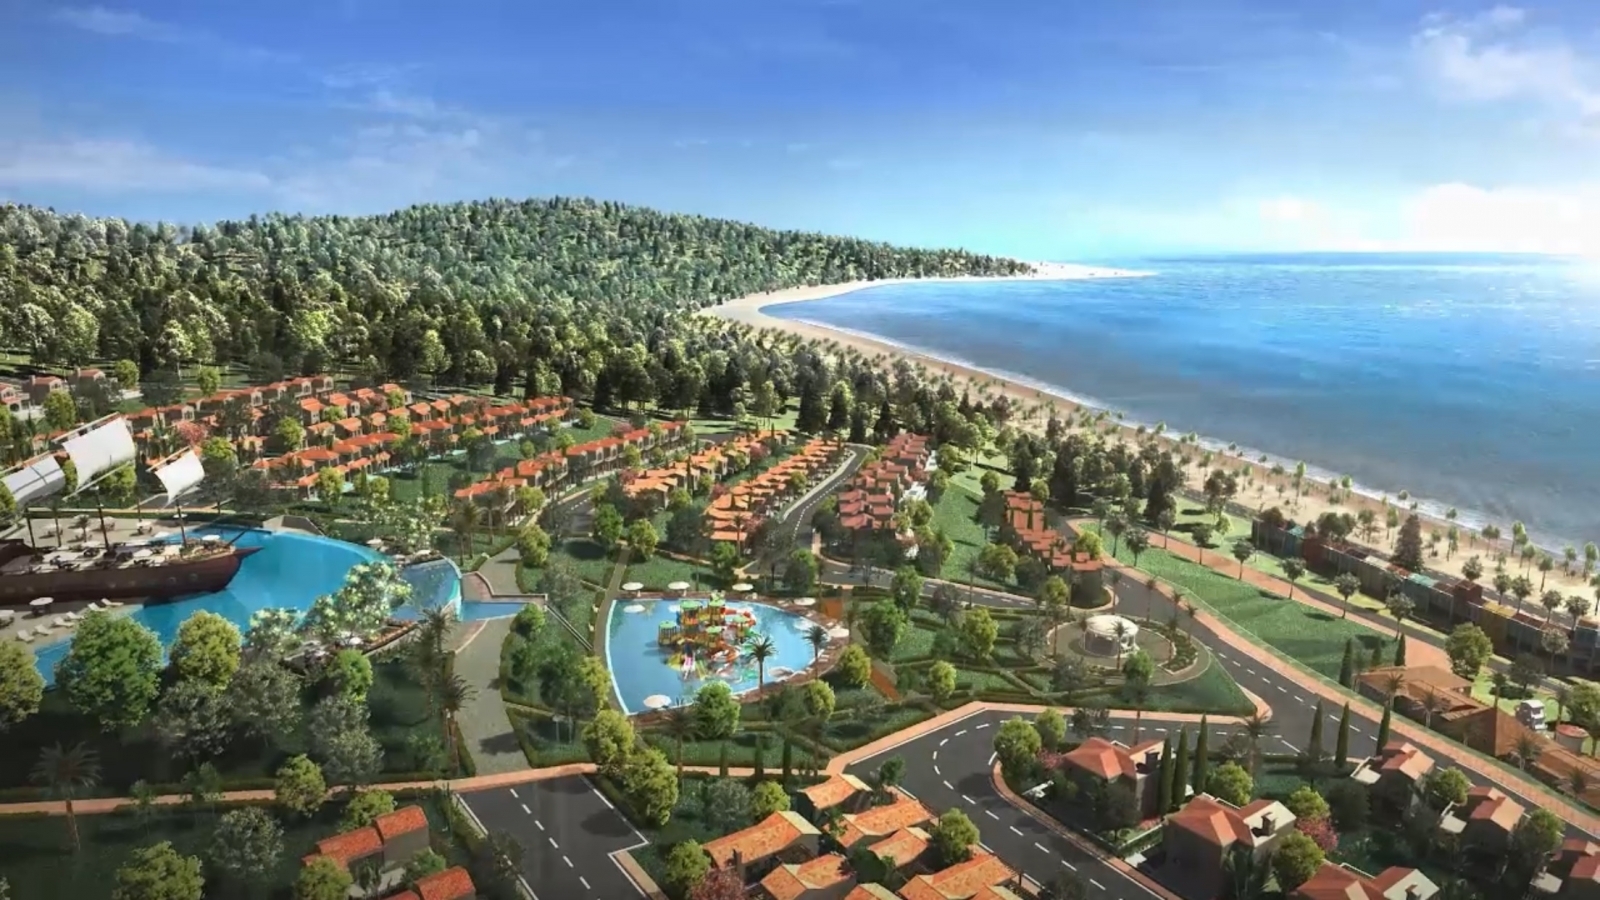 mui ne tourism opportunities for international hospitality projects